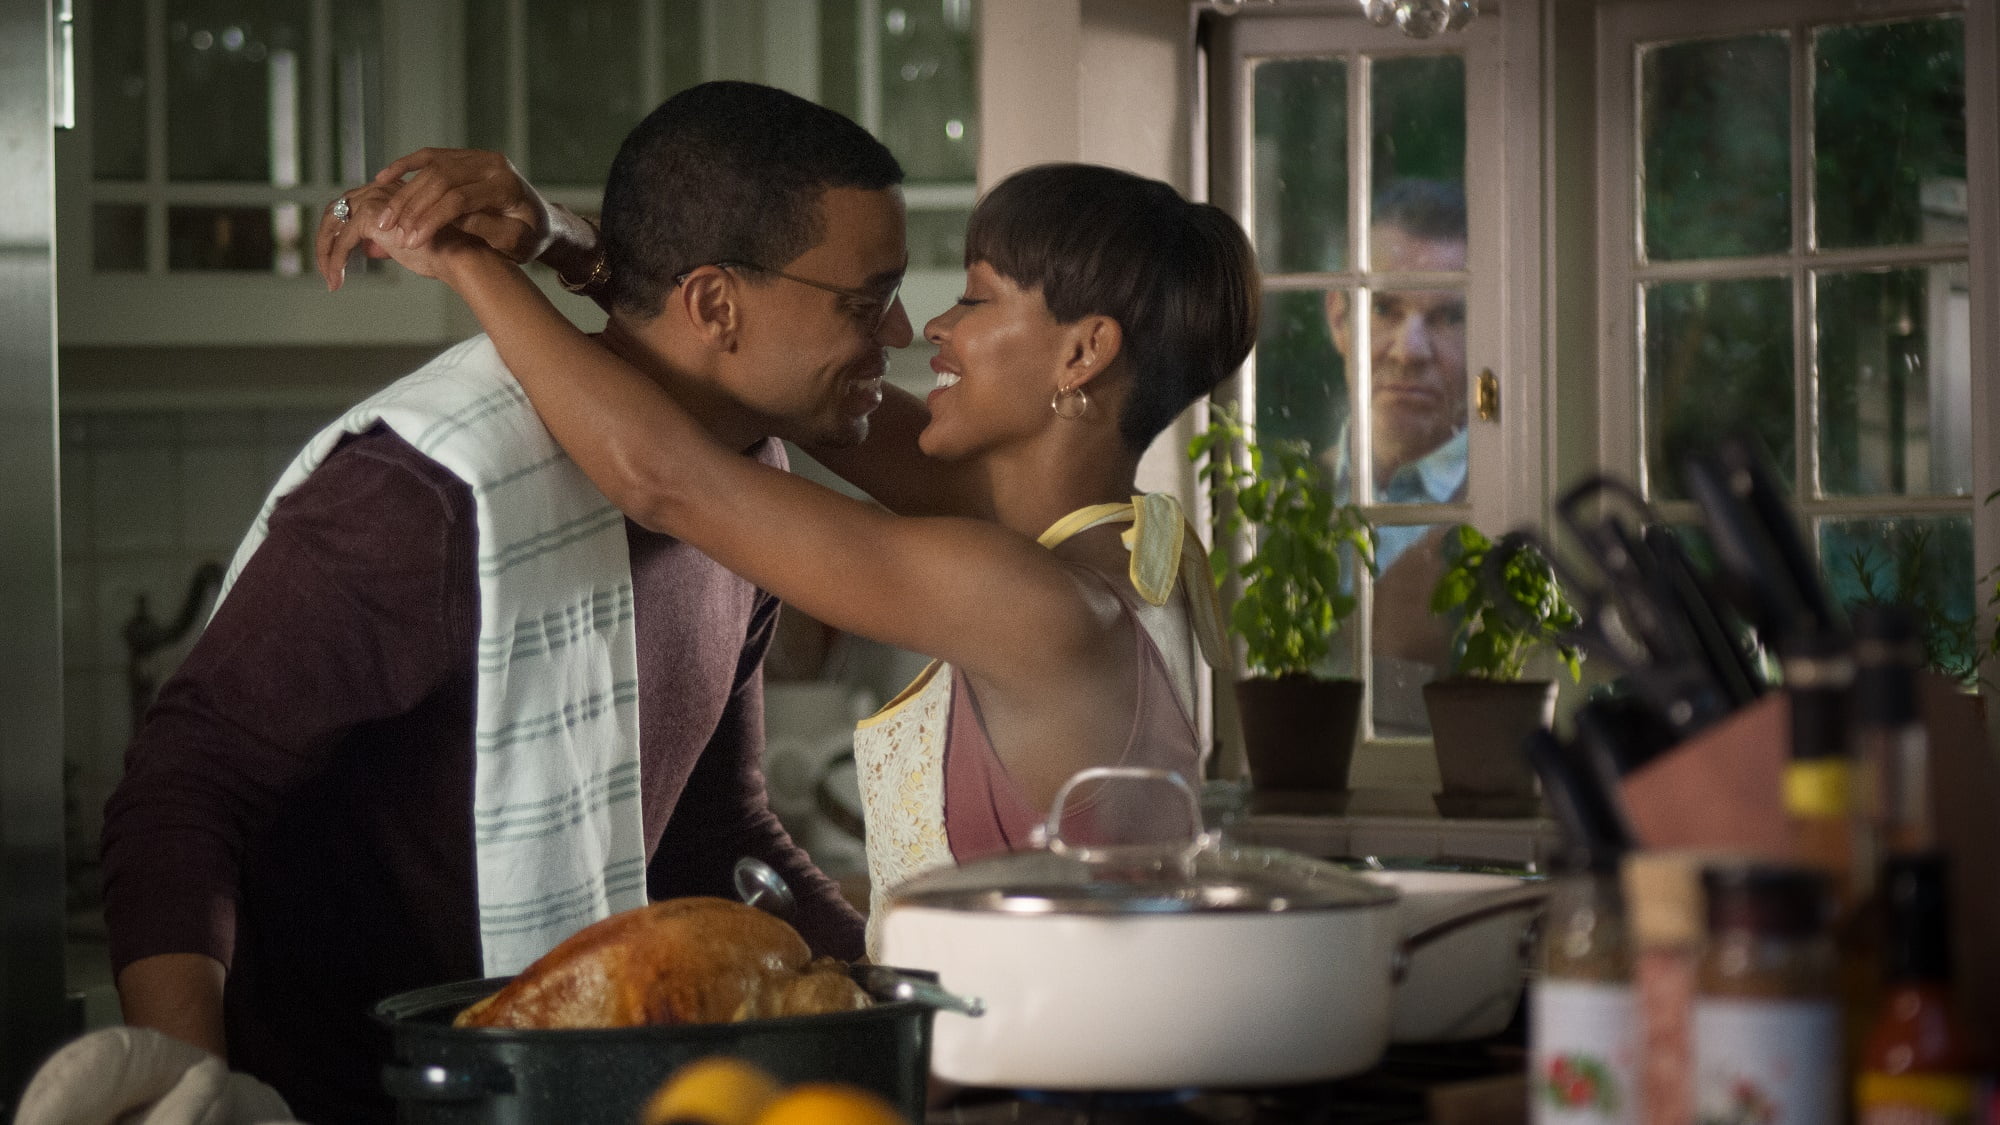 a thriller starring Michael Ealy, Meagan Good, and Dennis Quaid, opening in...